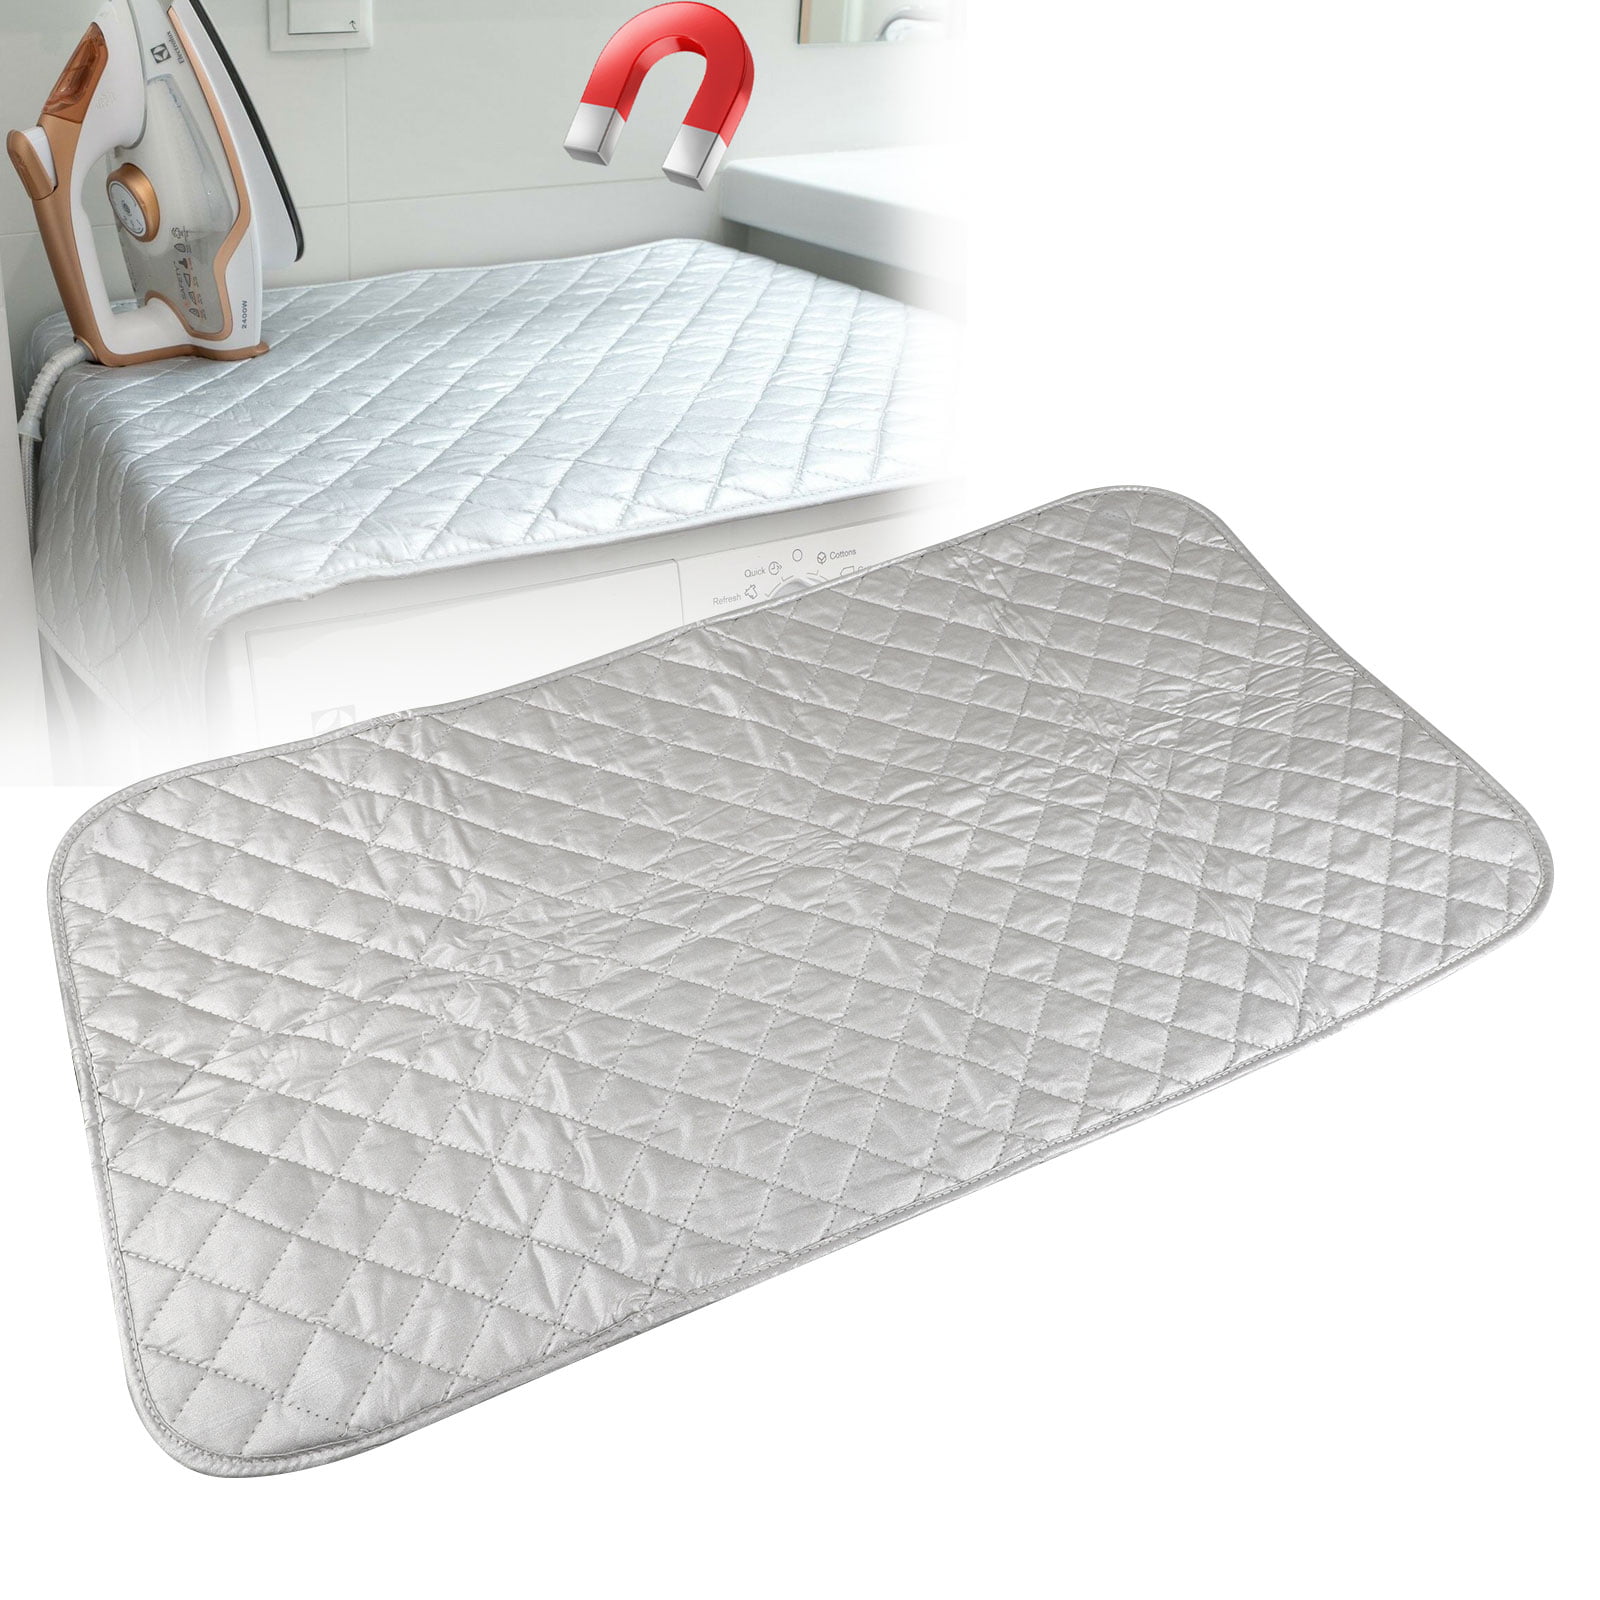 Ironing Blanket Ironing Mat,Upgraded Thick Portable Travel Ironing Pad,Isolate Heat Pad Cover for Washer,Dryer,Table Top,Countertop,Ironing Board for Small Space-19.6 x 28.3 inch